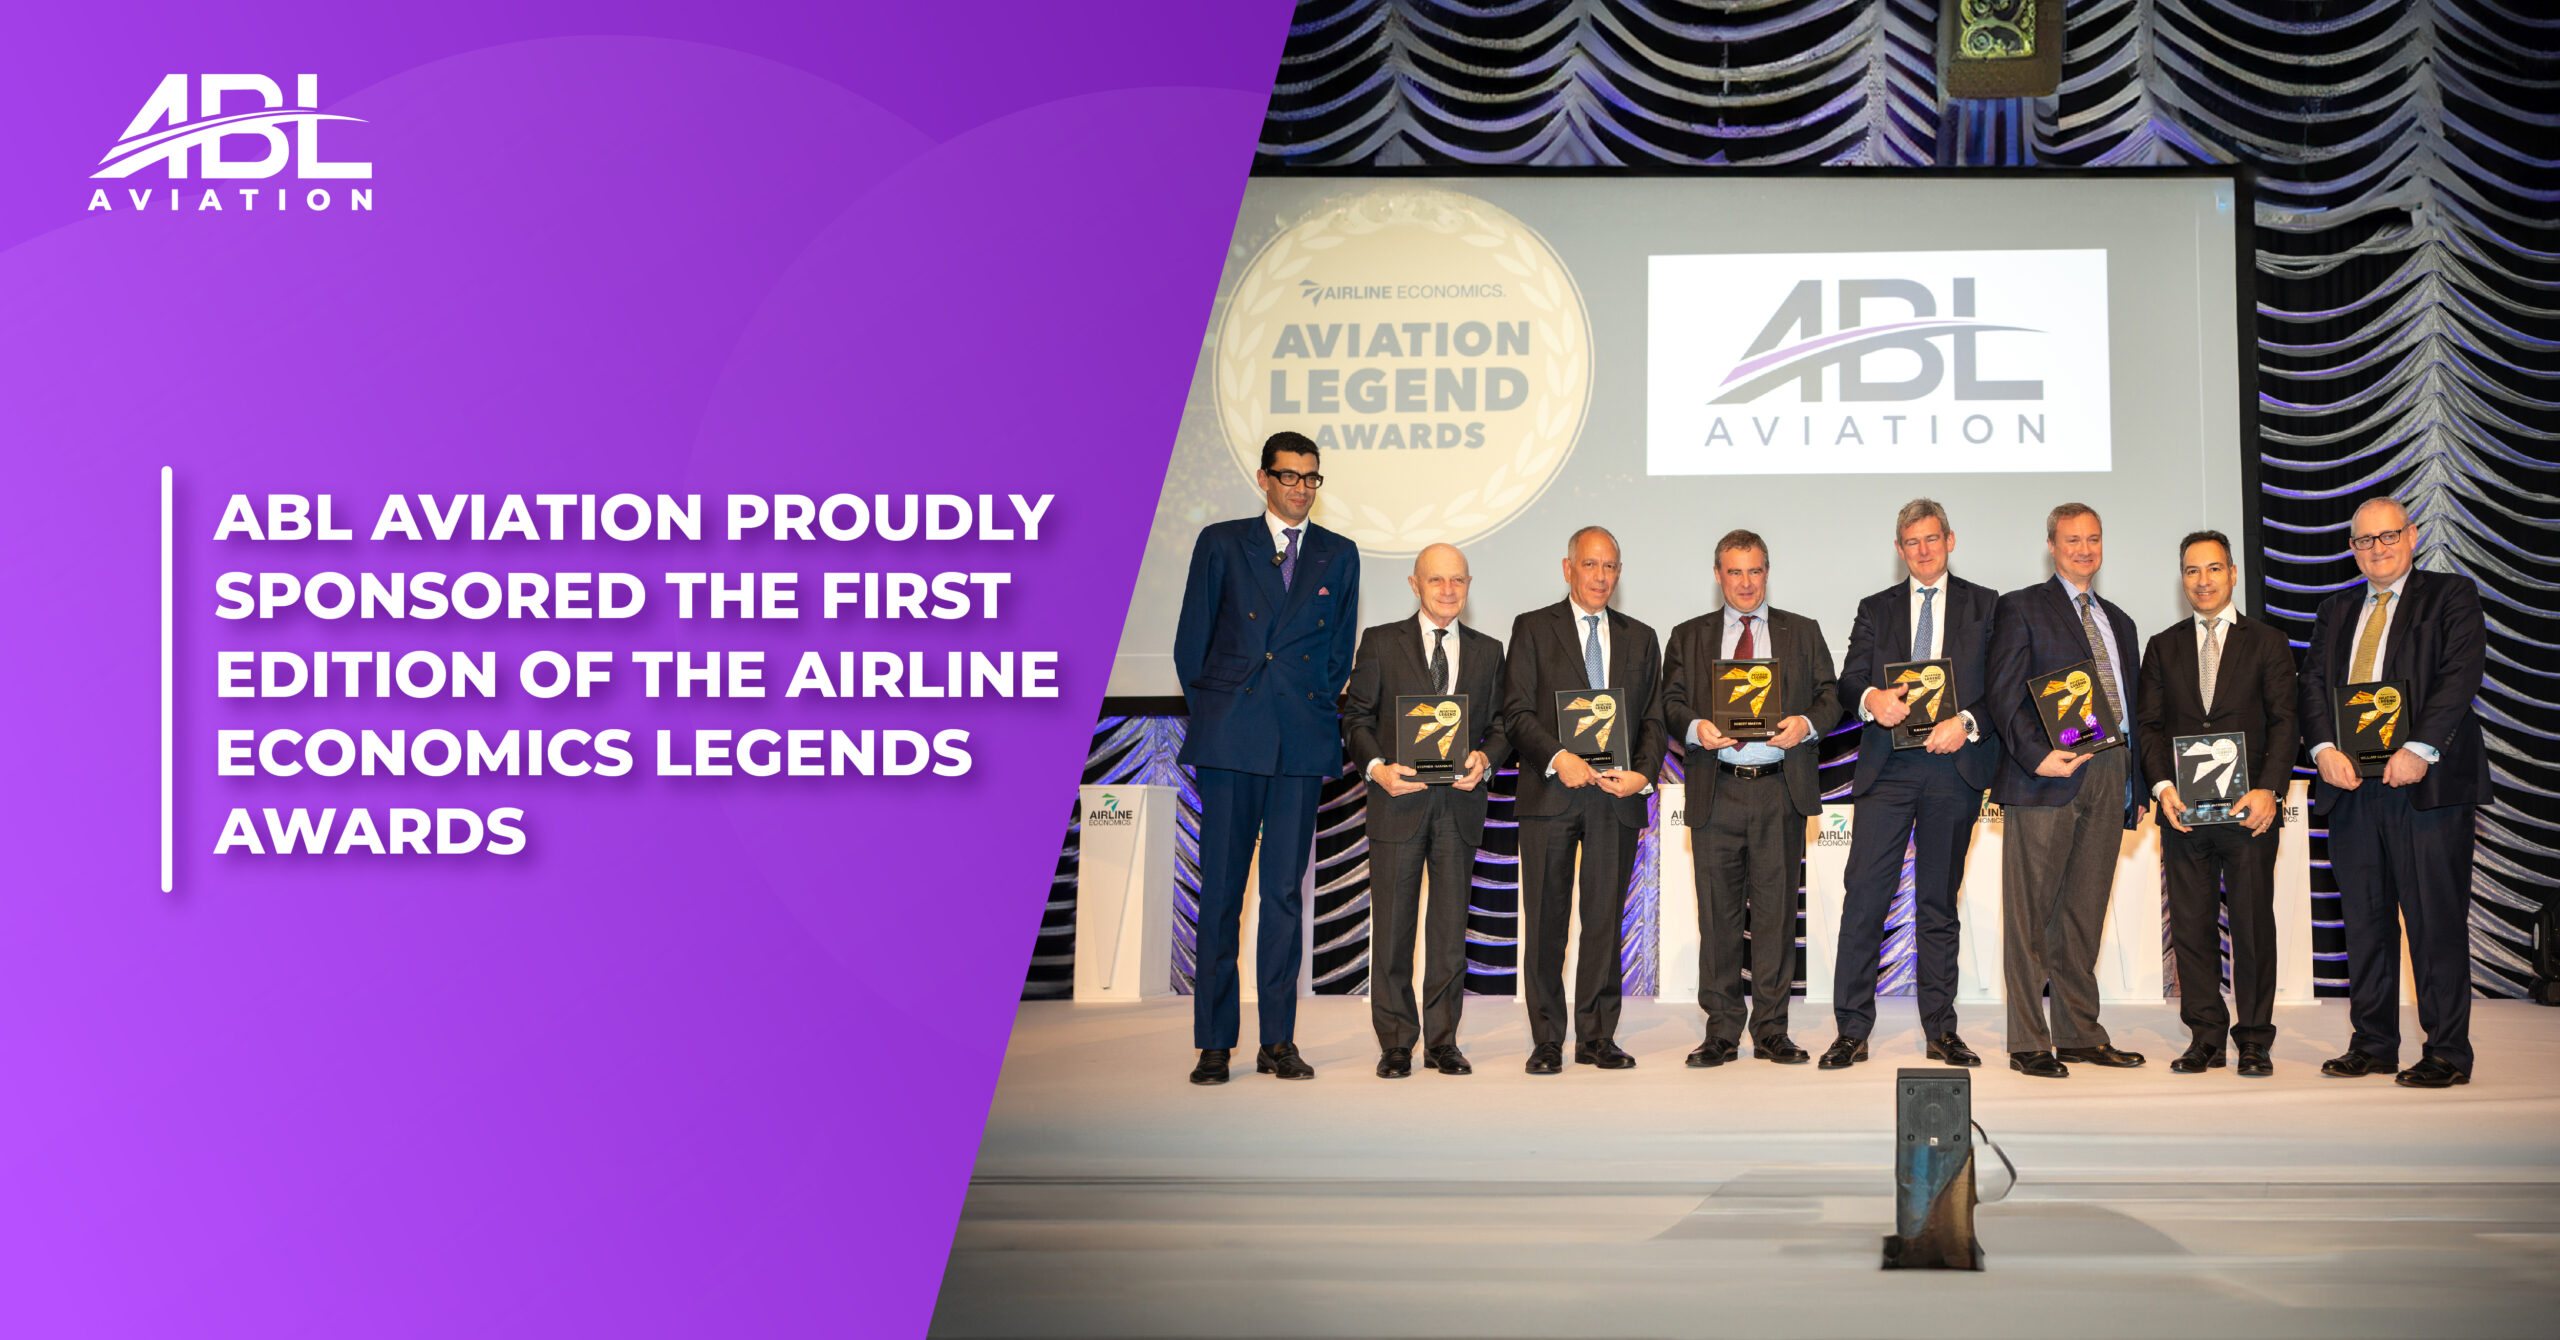 ABL Aviation Proudly Sponsored the Airline Economics Legends Awards